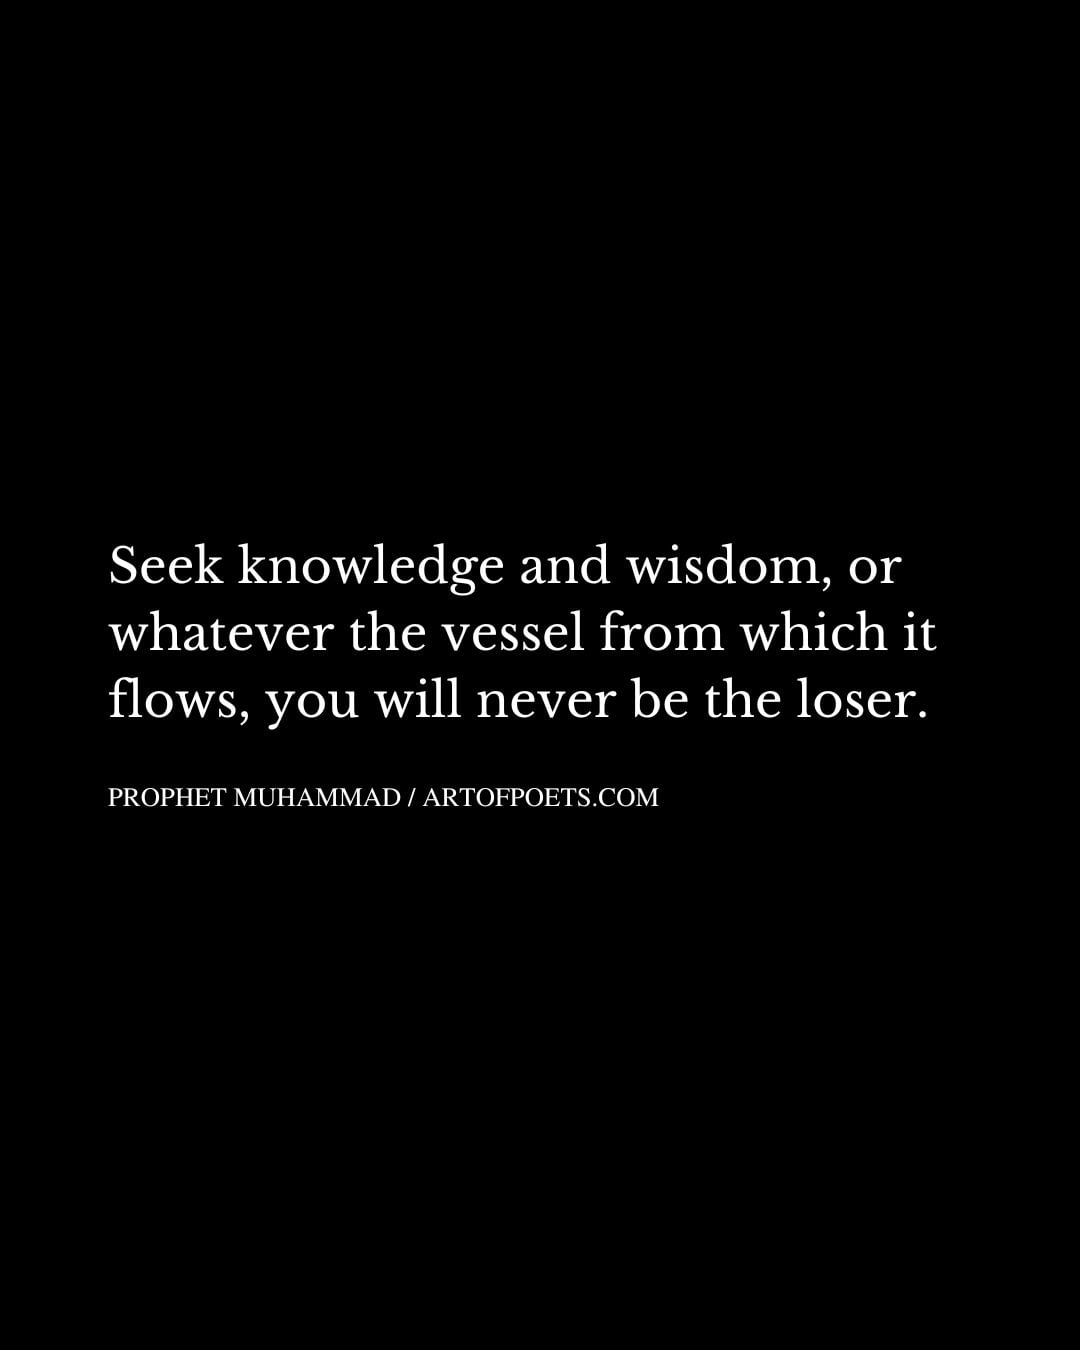 Seek knowledge and wisdom or whatever the vessel from which it flows you will never be the loser